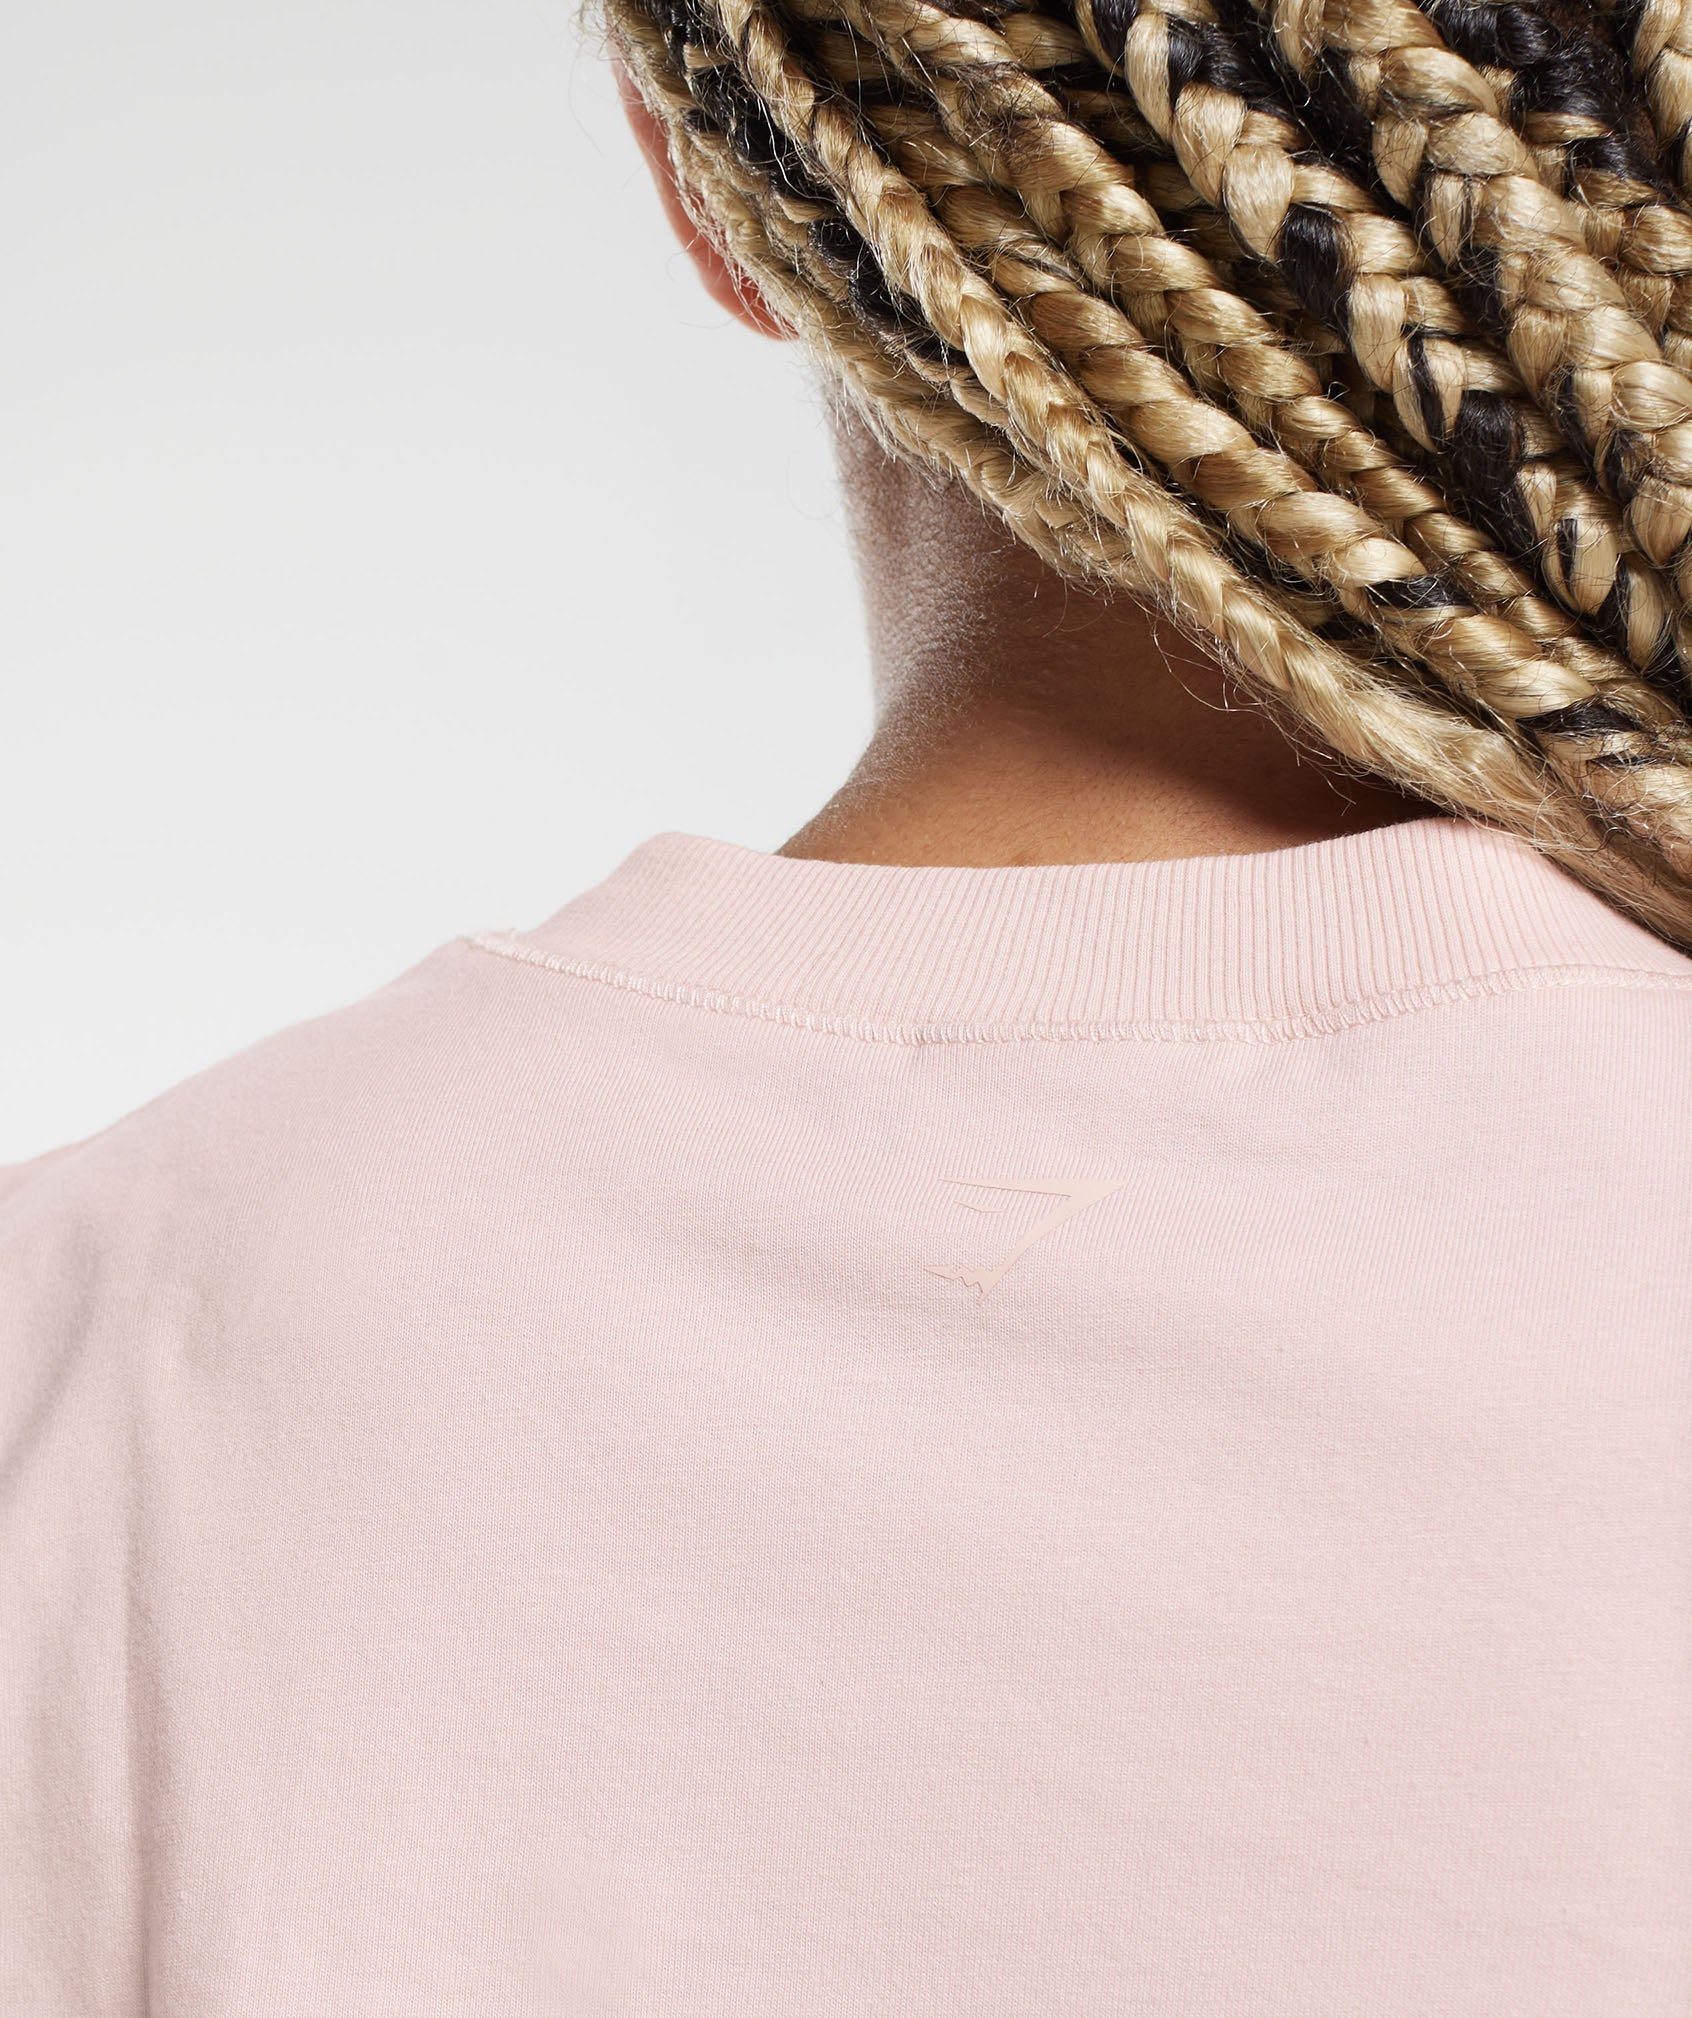 Cotton Boxy Crop Top in Misty Pink